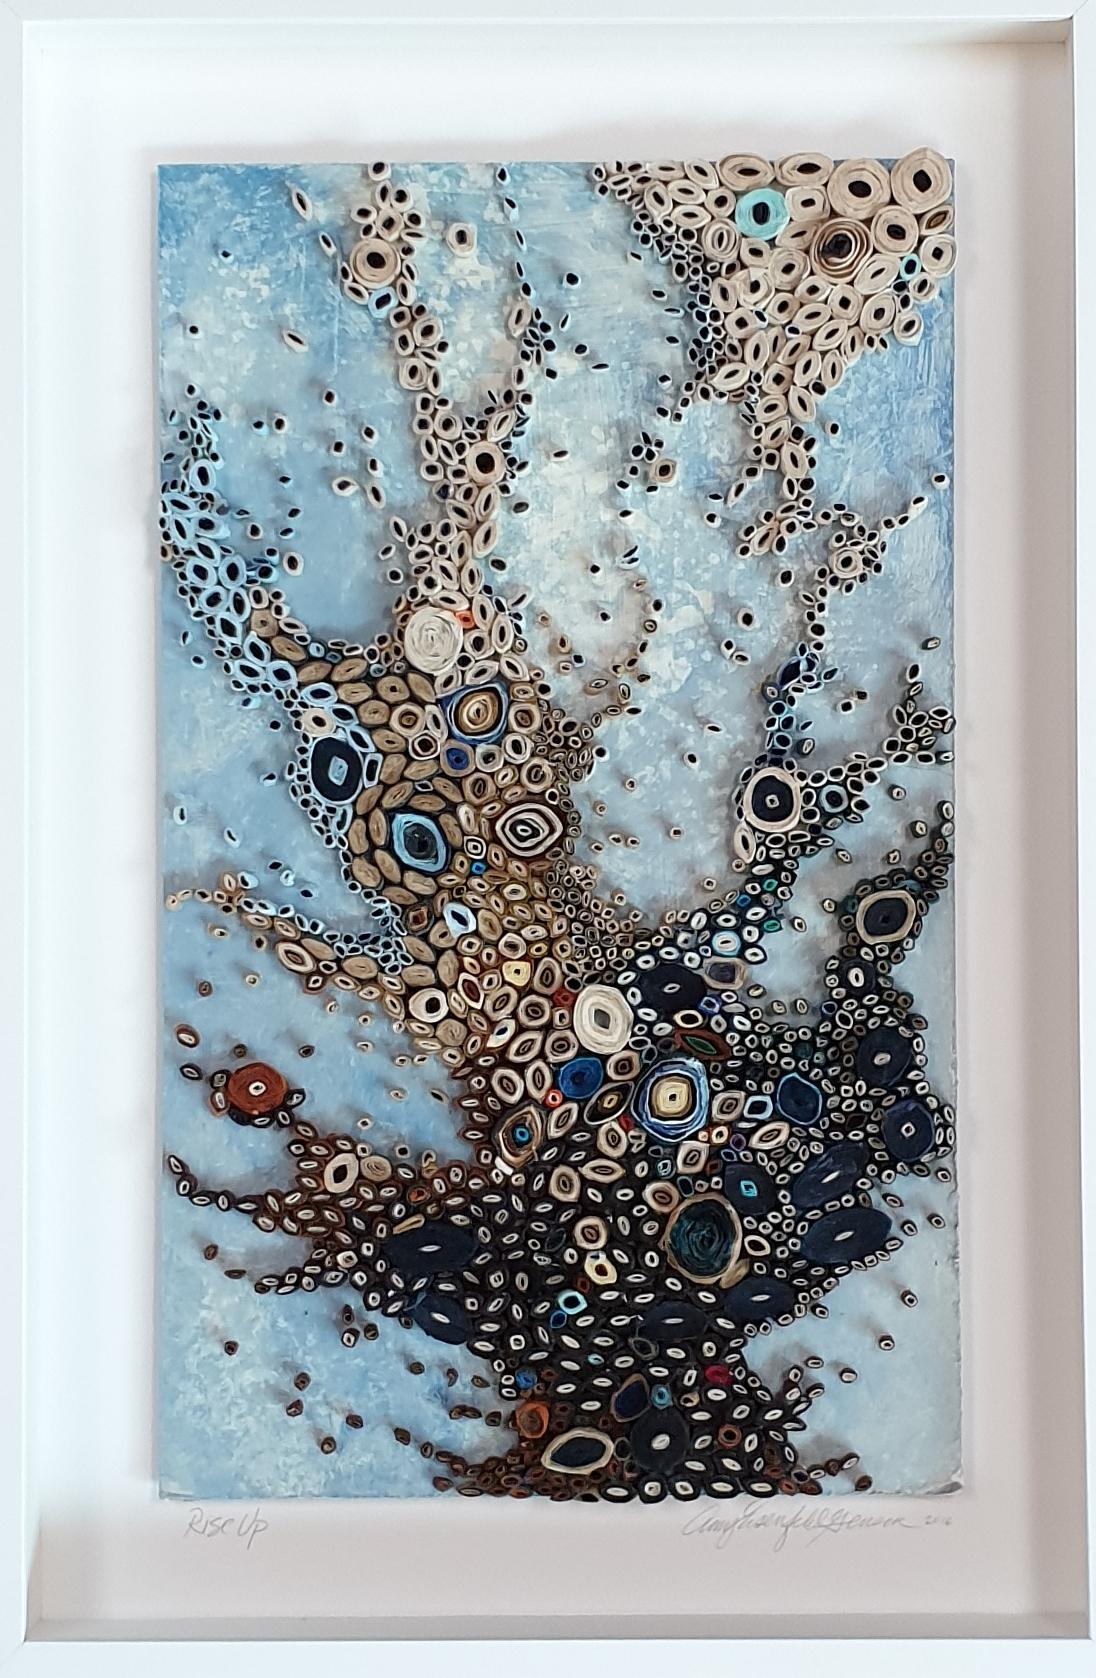 Rise Up - contemporary modern organic sculpture painting relief - Mixed Media Art by Amy Genser